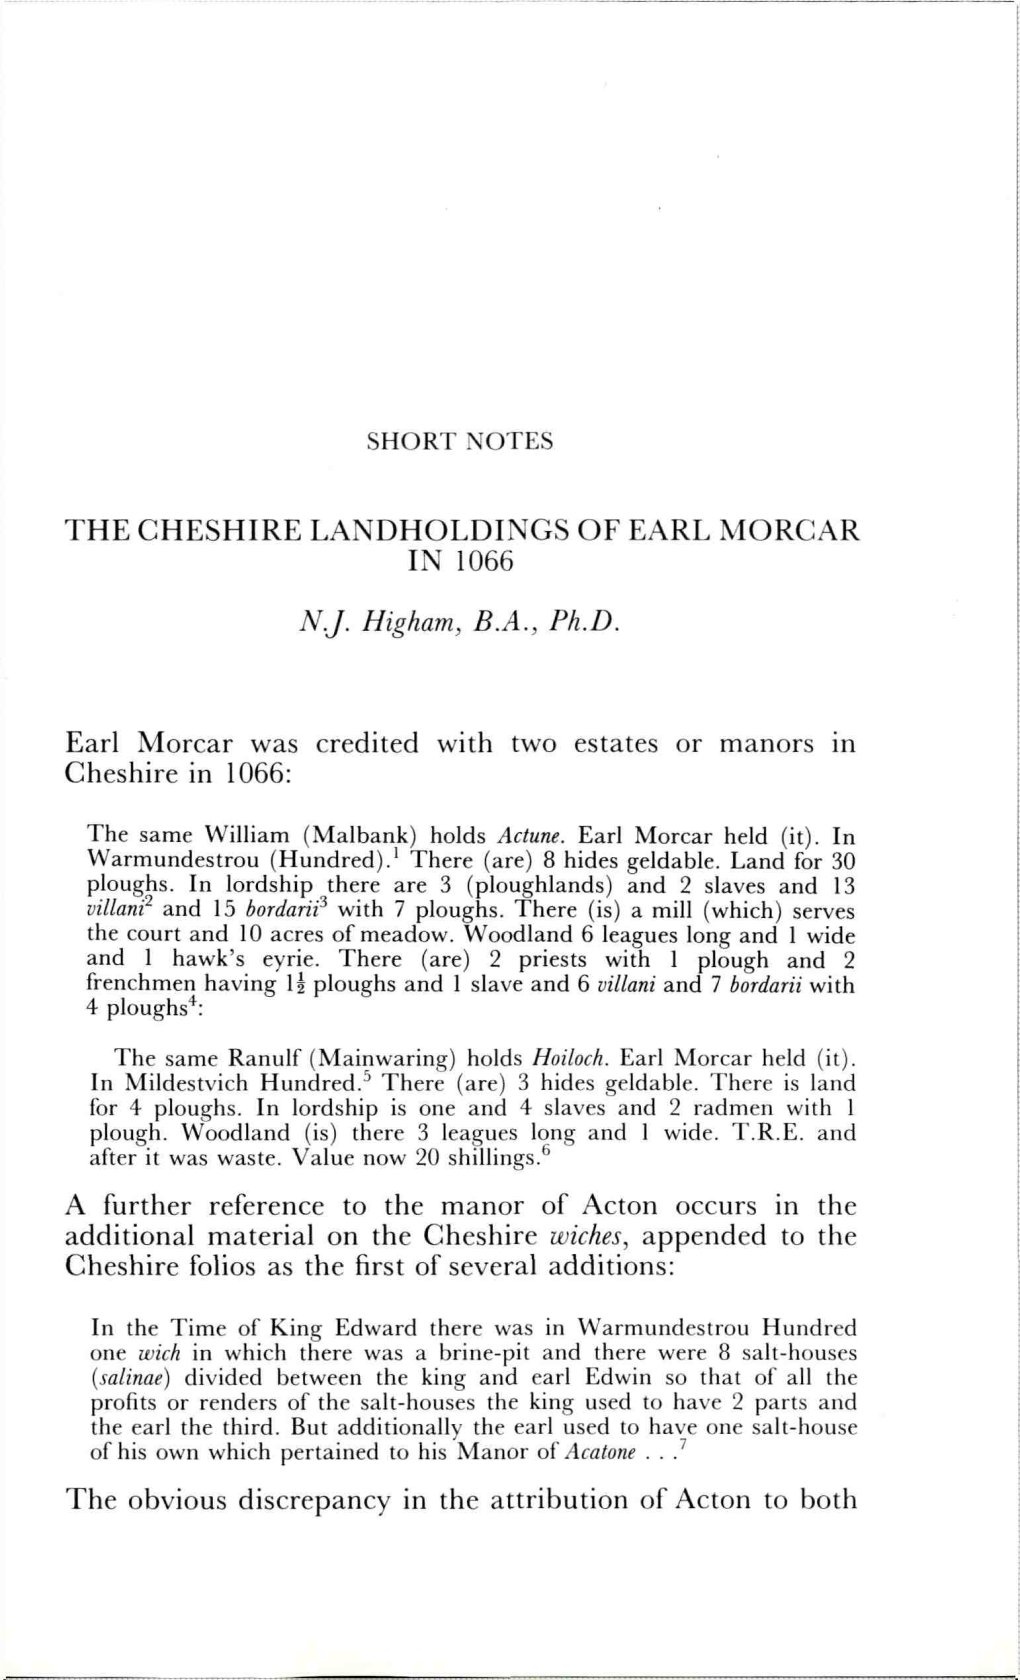 The Cheshire Landholdings of Earl Morcar in 1066